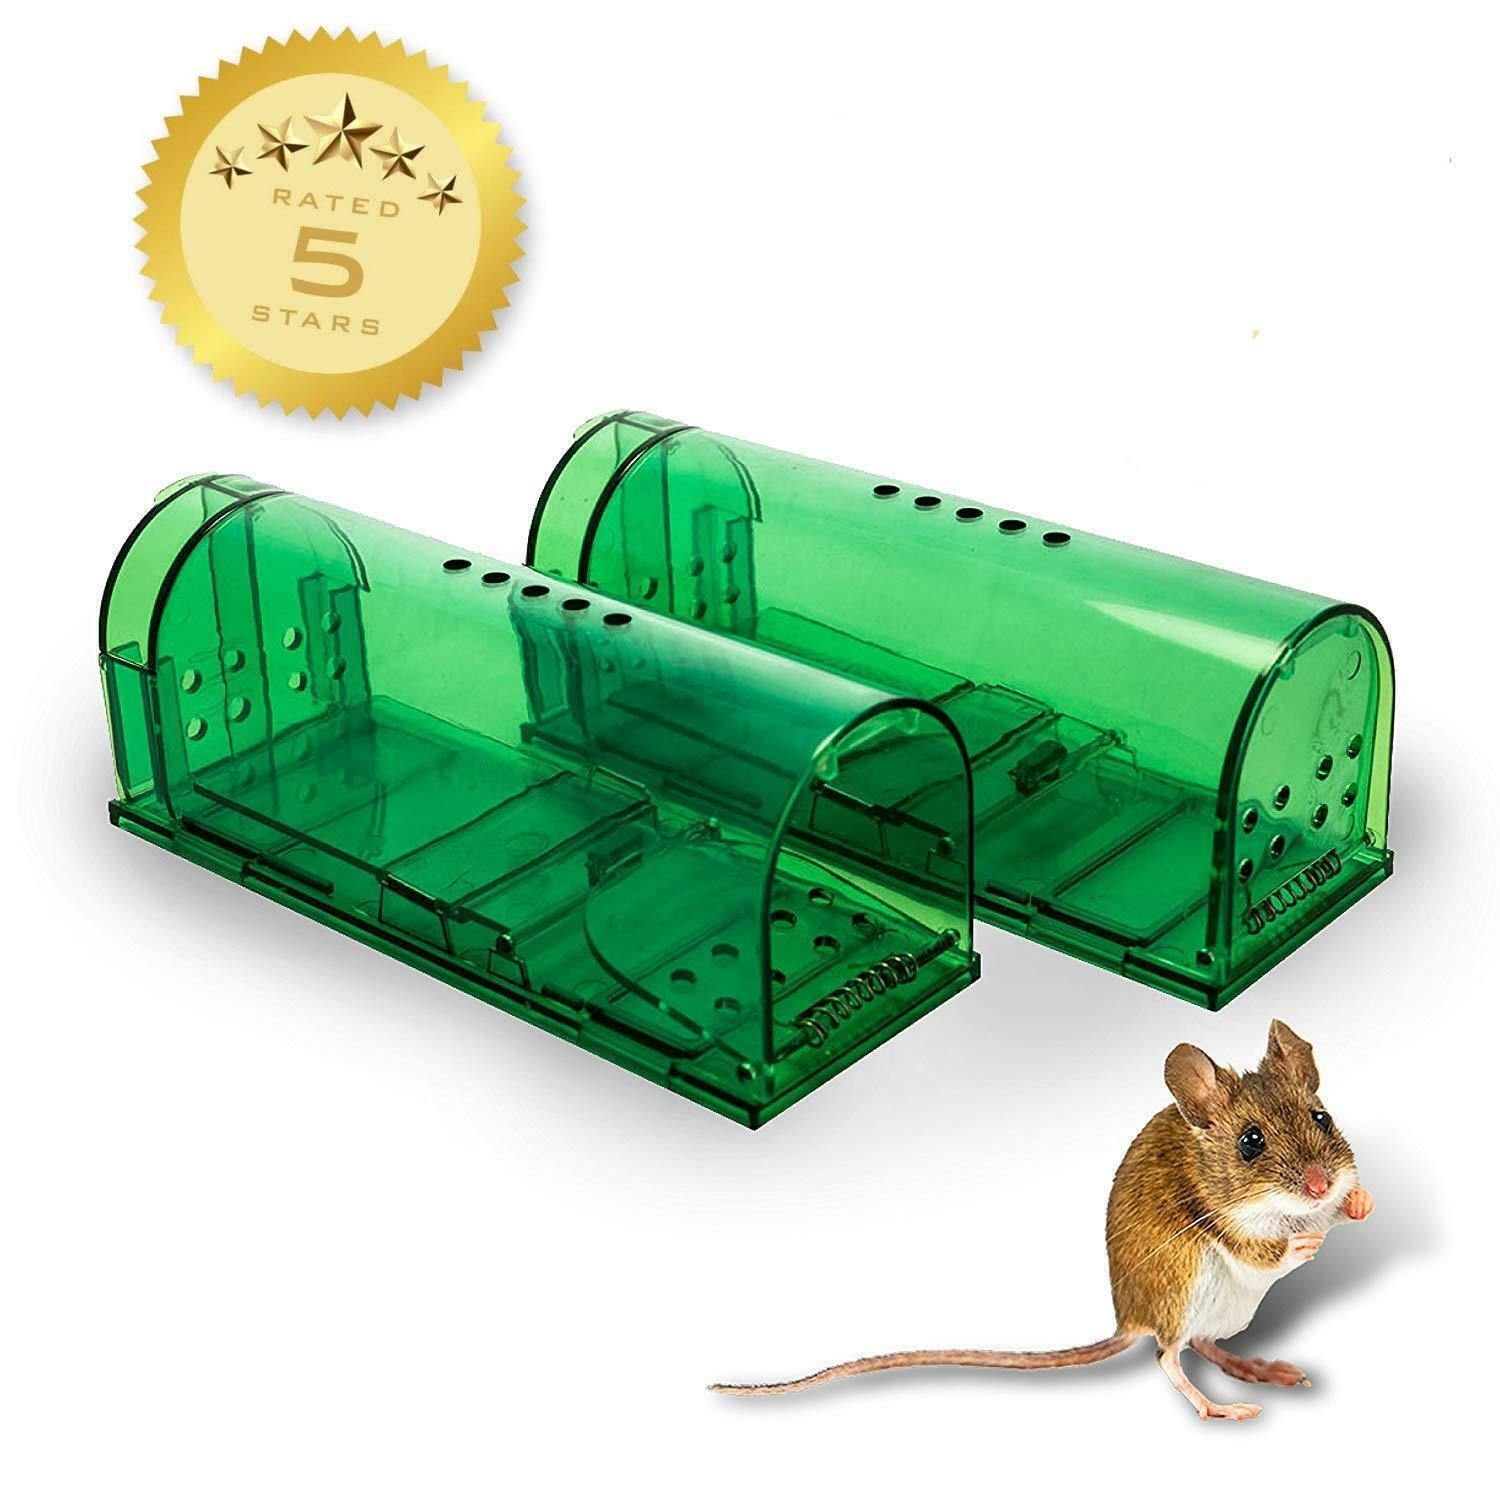 Humane Mouse Traps - 2 Pack - Live Catch And Release - #1 Best Selling Mousetrap